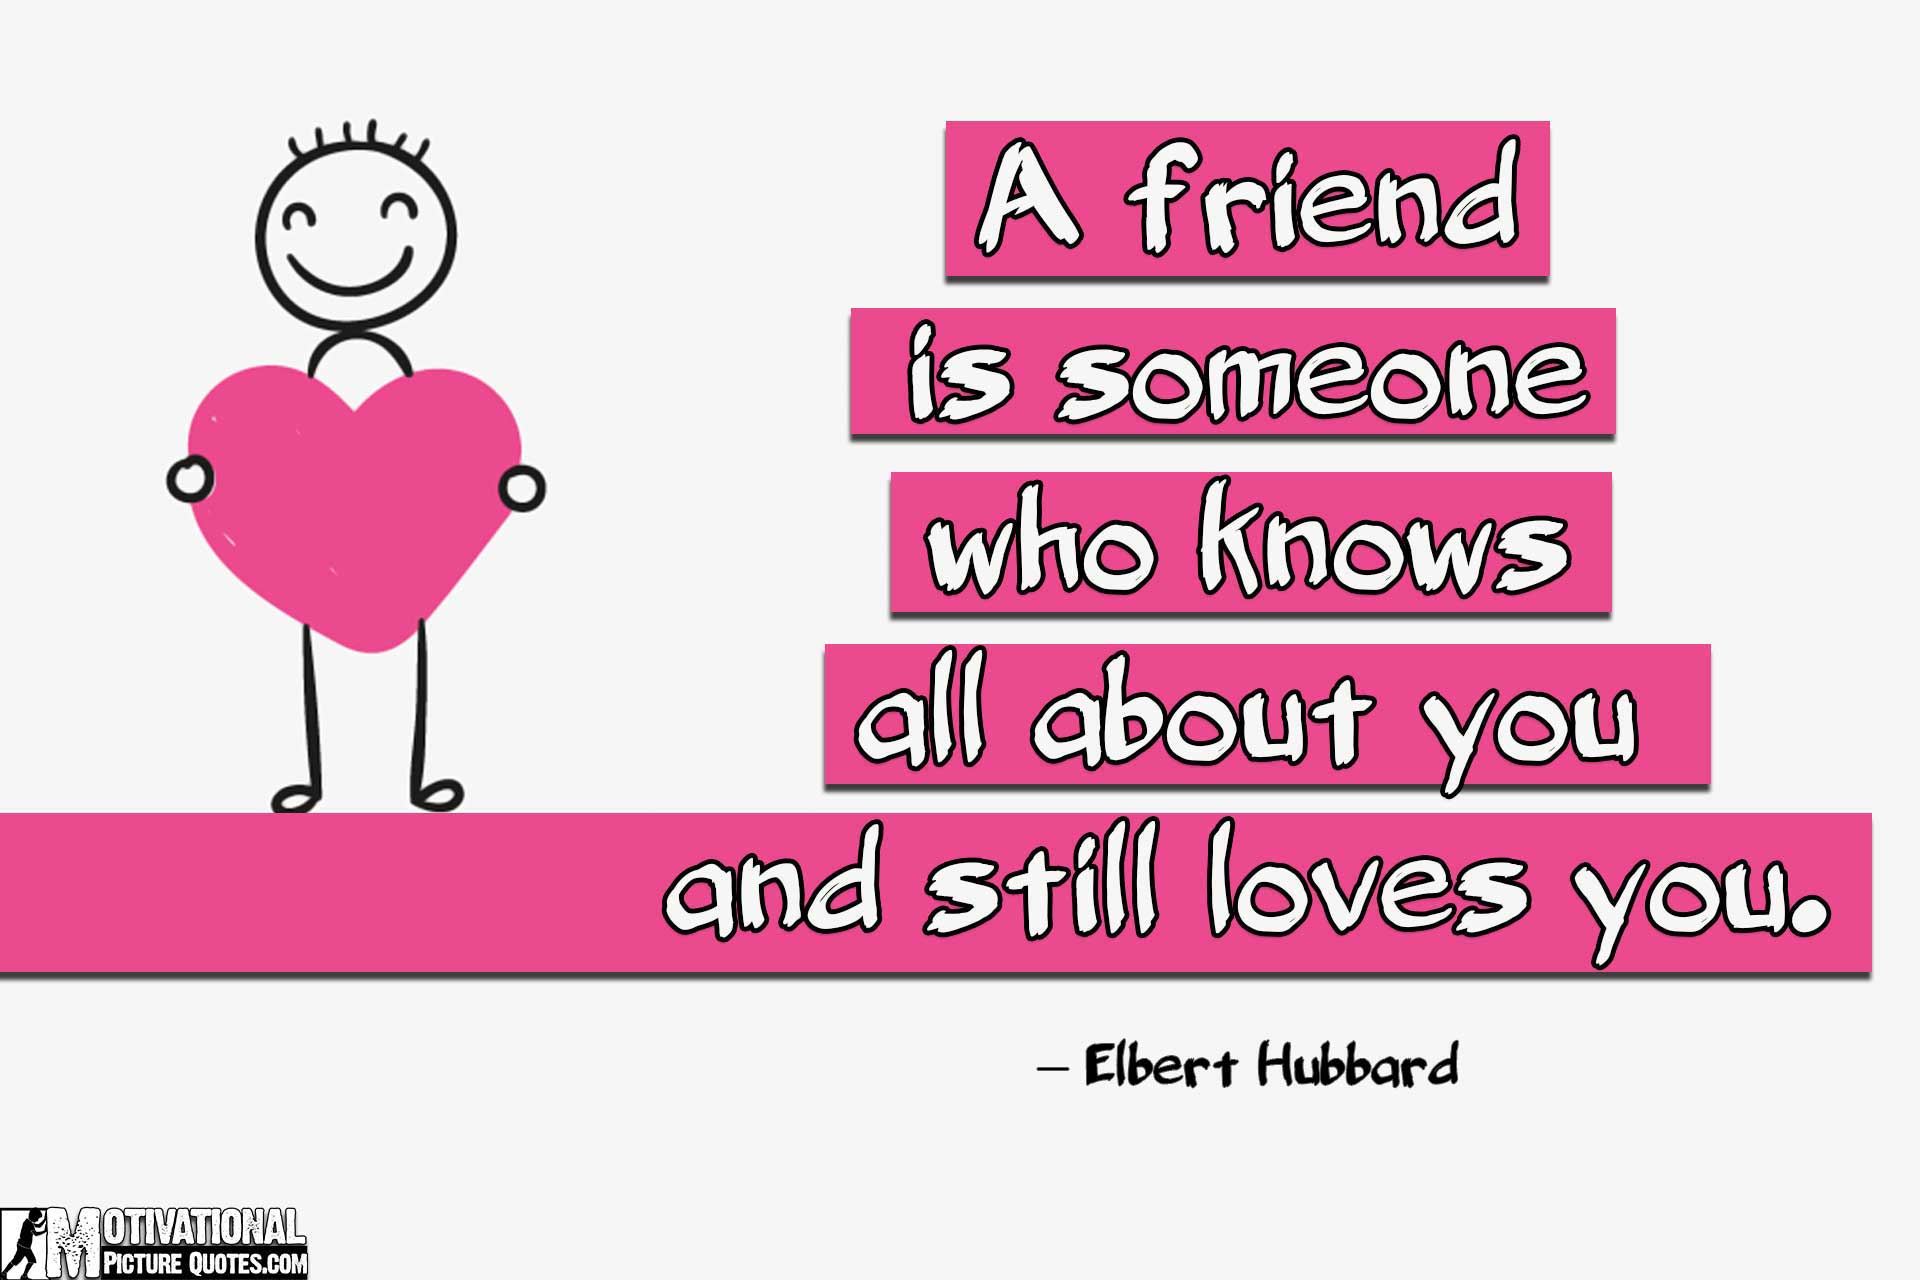 Heart Touching Friendship Quotes With Images - Love Heart Touching Cute Friendship Quotes - HD Wallpaper 